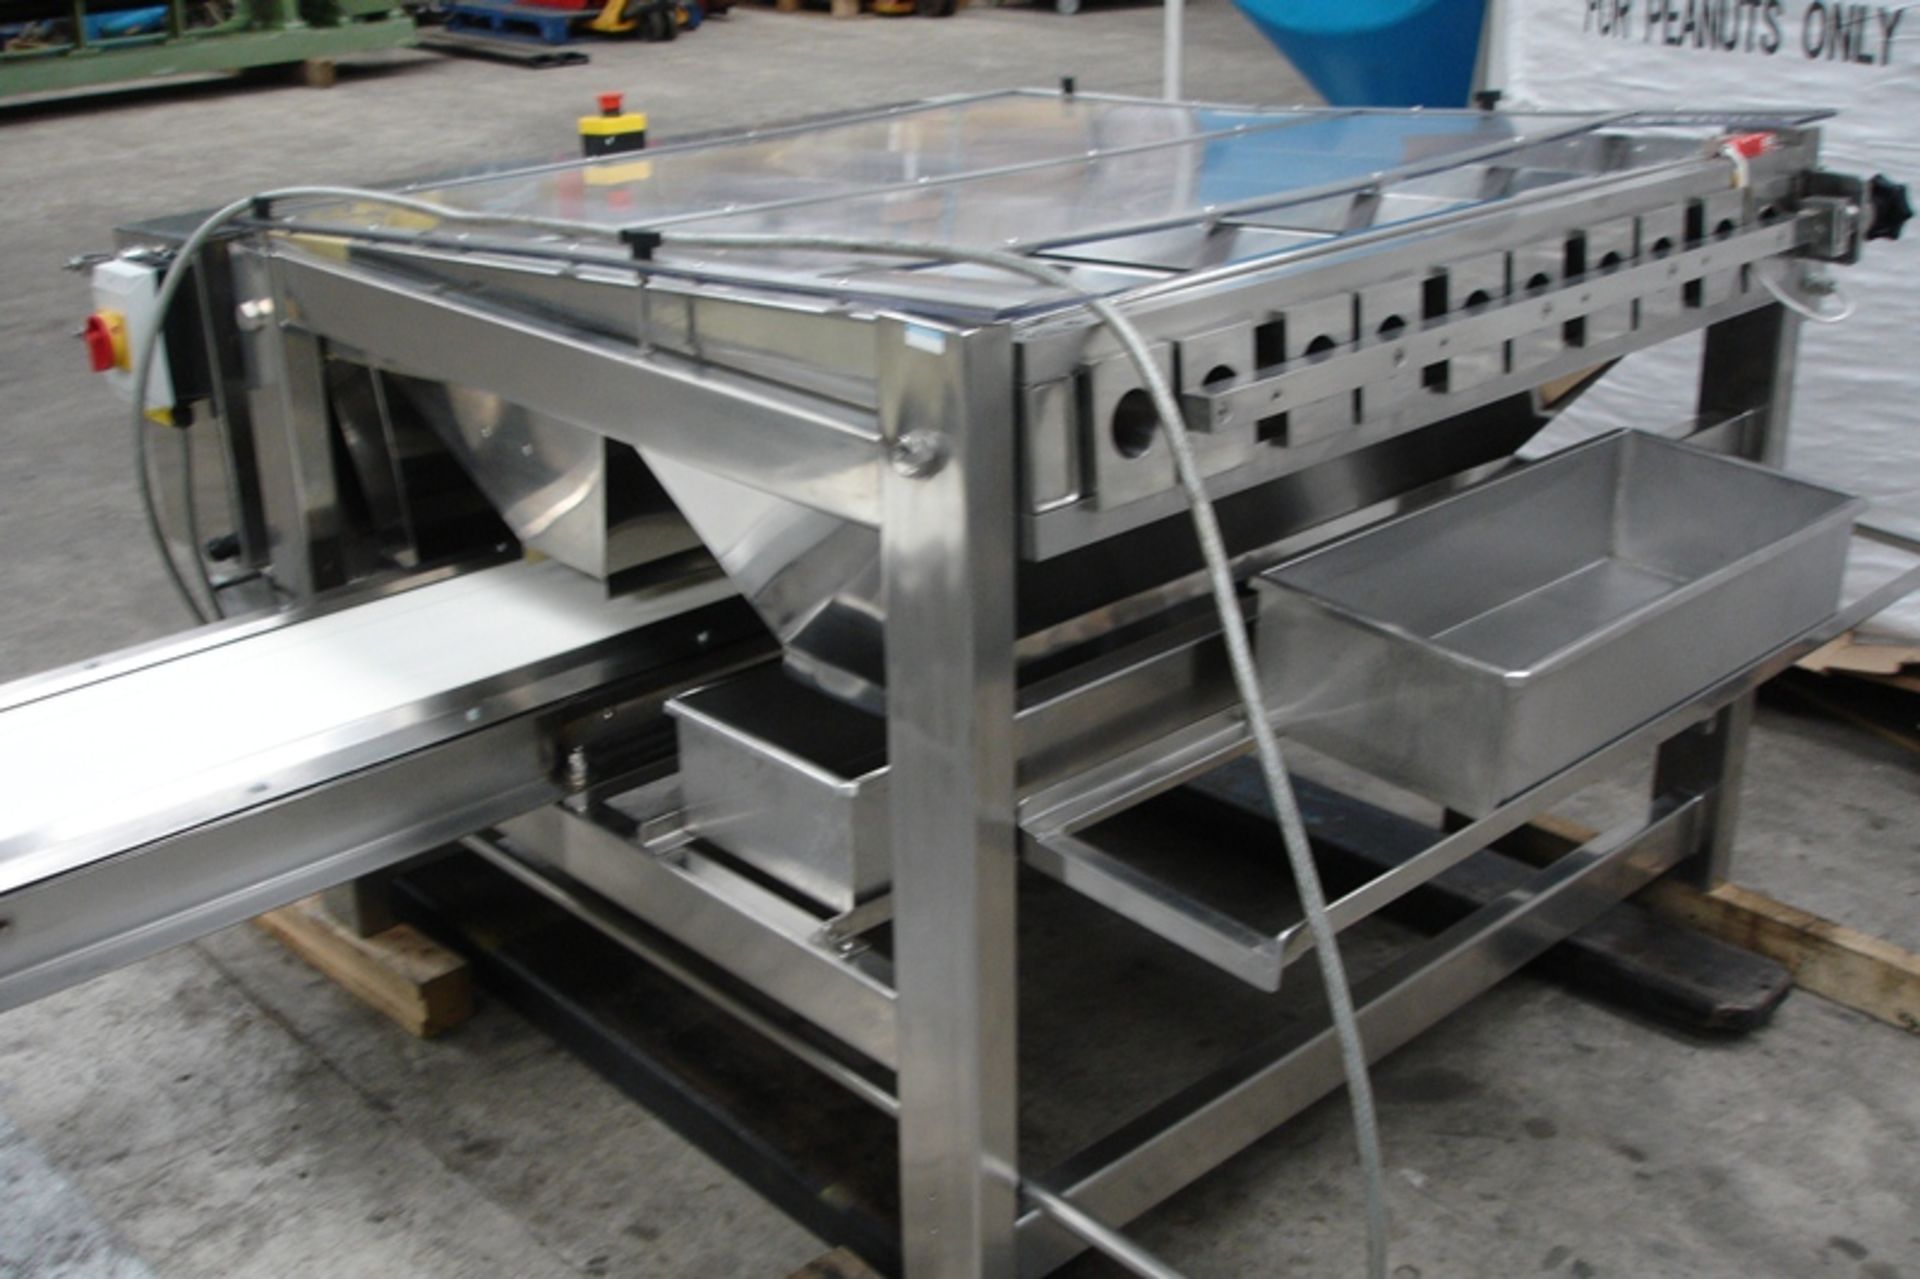 Fully Stainless Steel food grade 5 Lane Sizing / Grading Machine with Outfeed Conveyor - Image 6 of 7